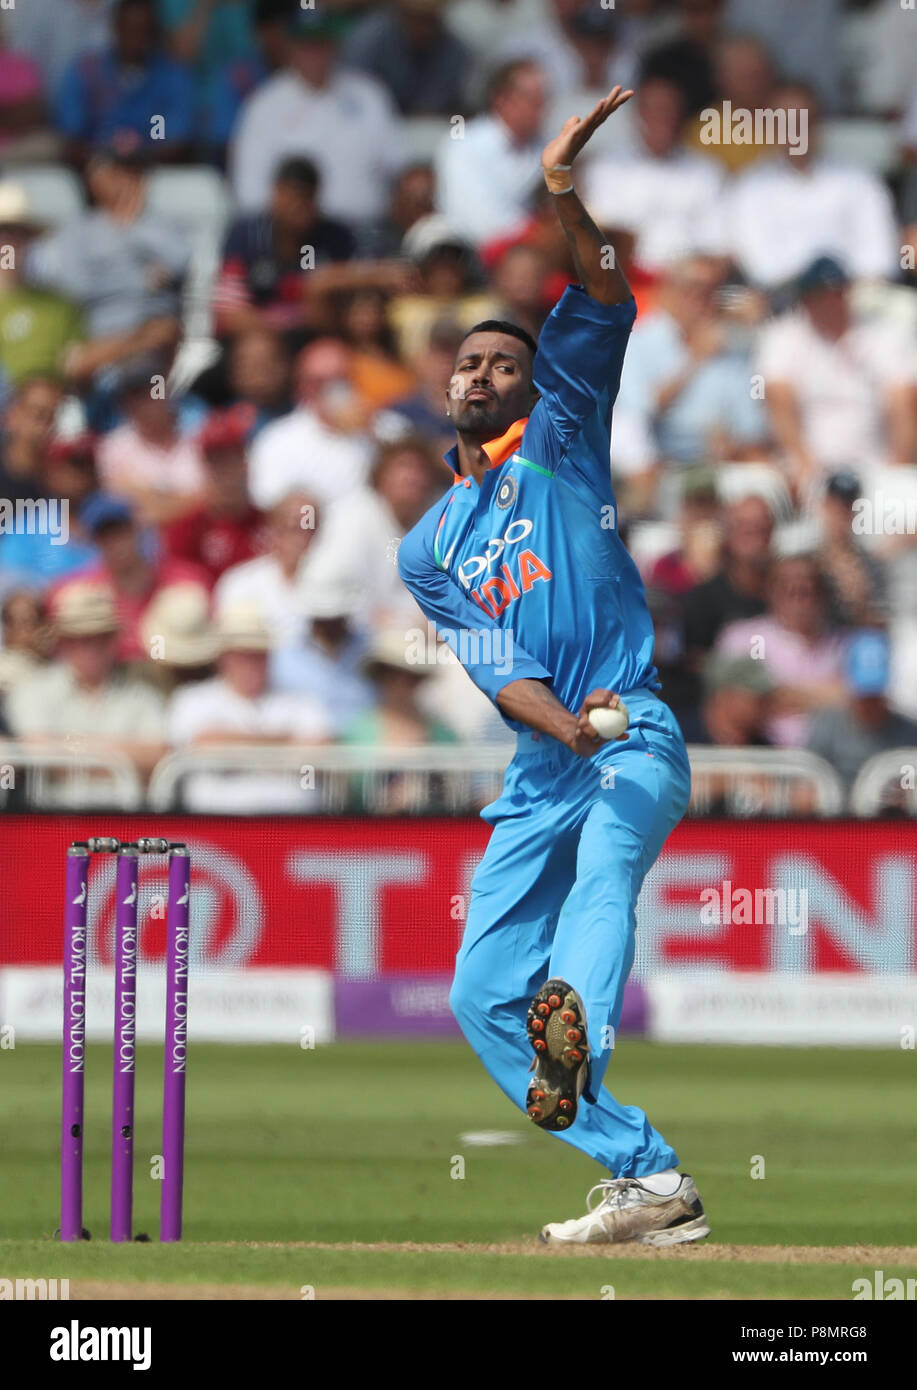 India's Hardik Pandya during the One Day International Series match at  Trent Bridge, Nottingham. PRESS ASSOCIATION Photo. Picture date: Thursday  July 12. See PA story CRICKET England. Photo credit should read: David